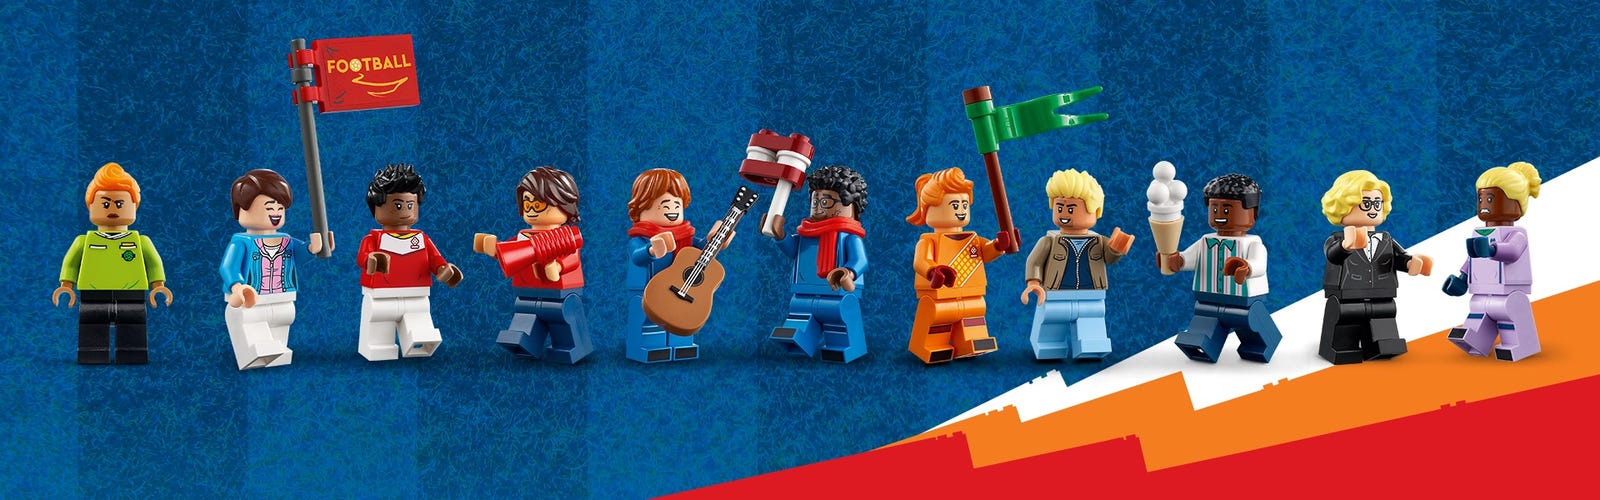 The LEGO Group teams up with the stars of women's football to